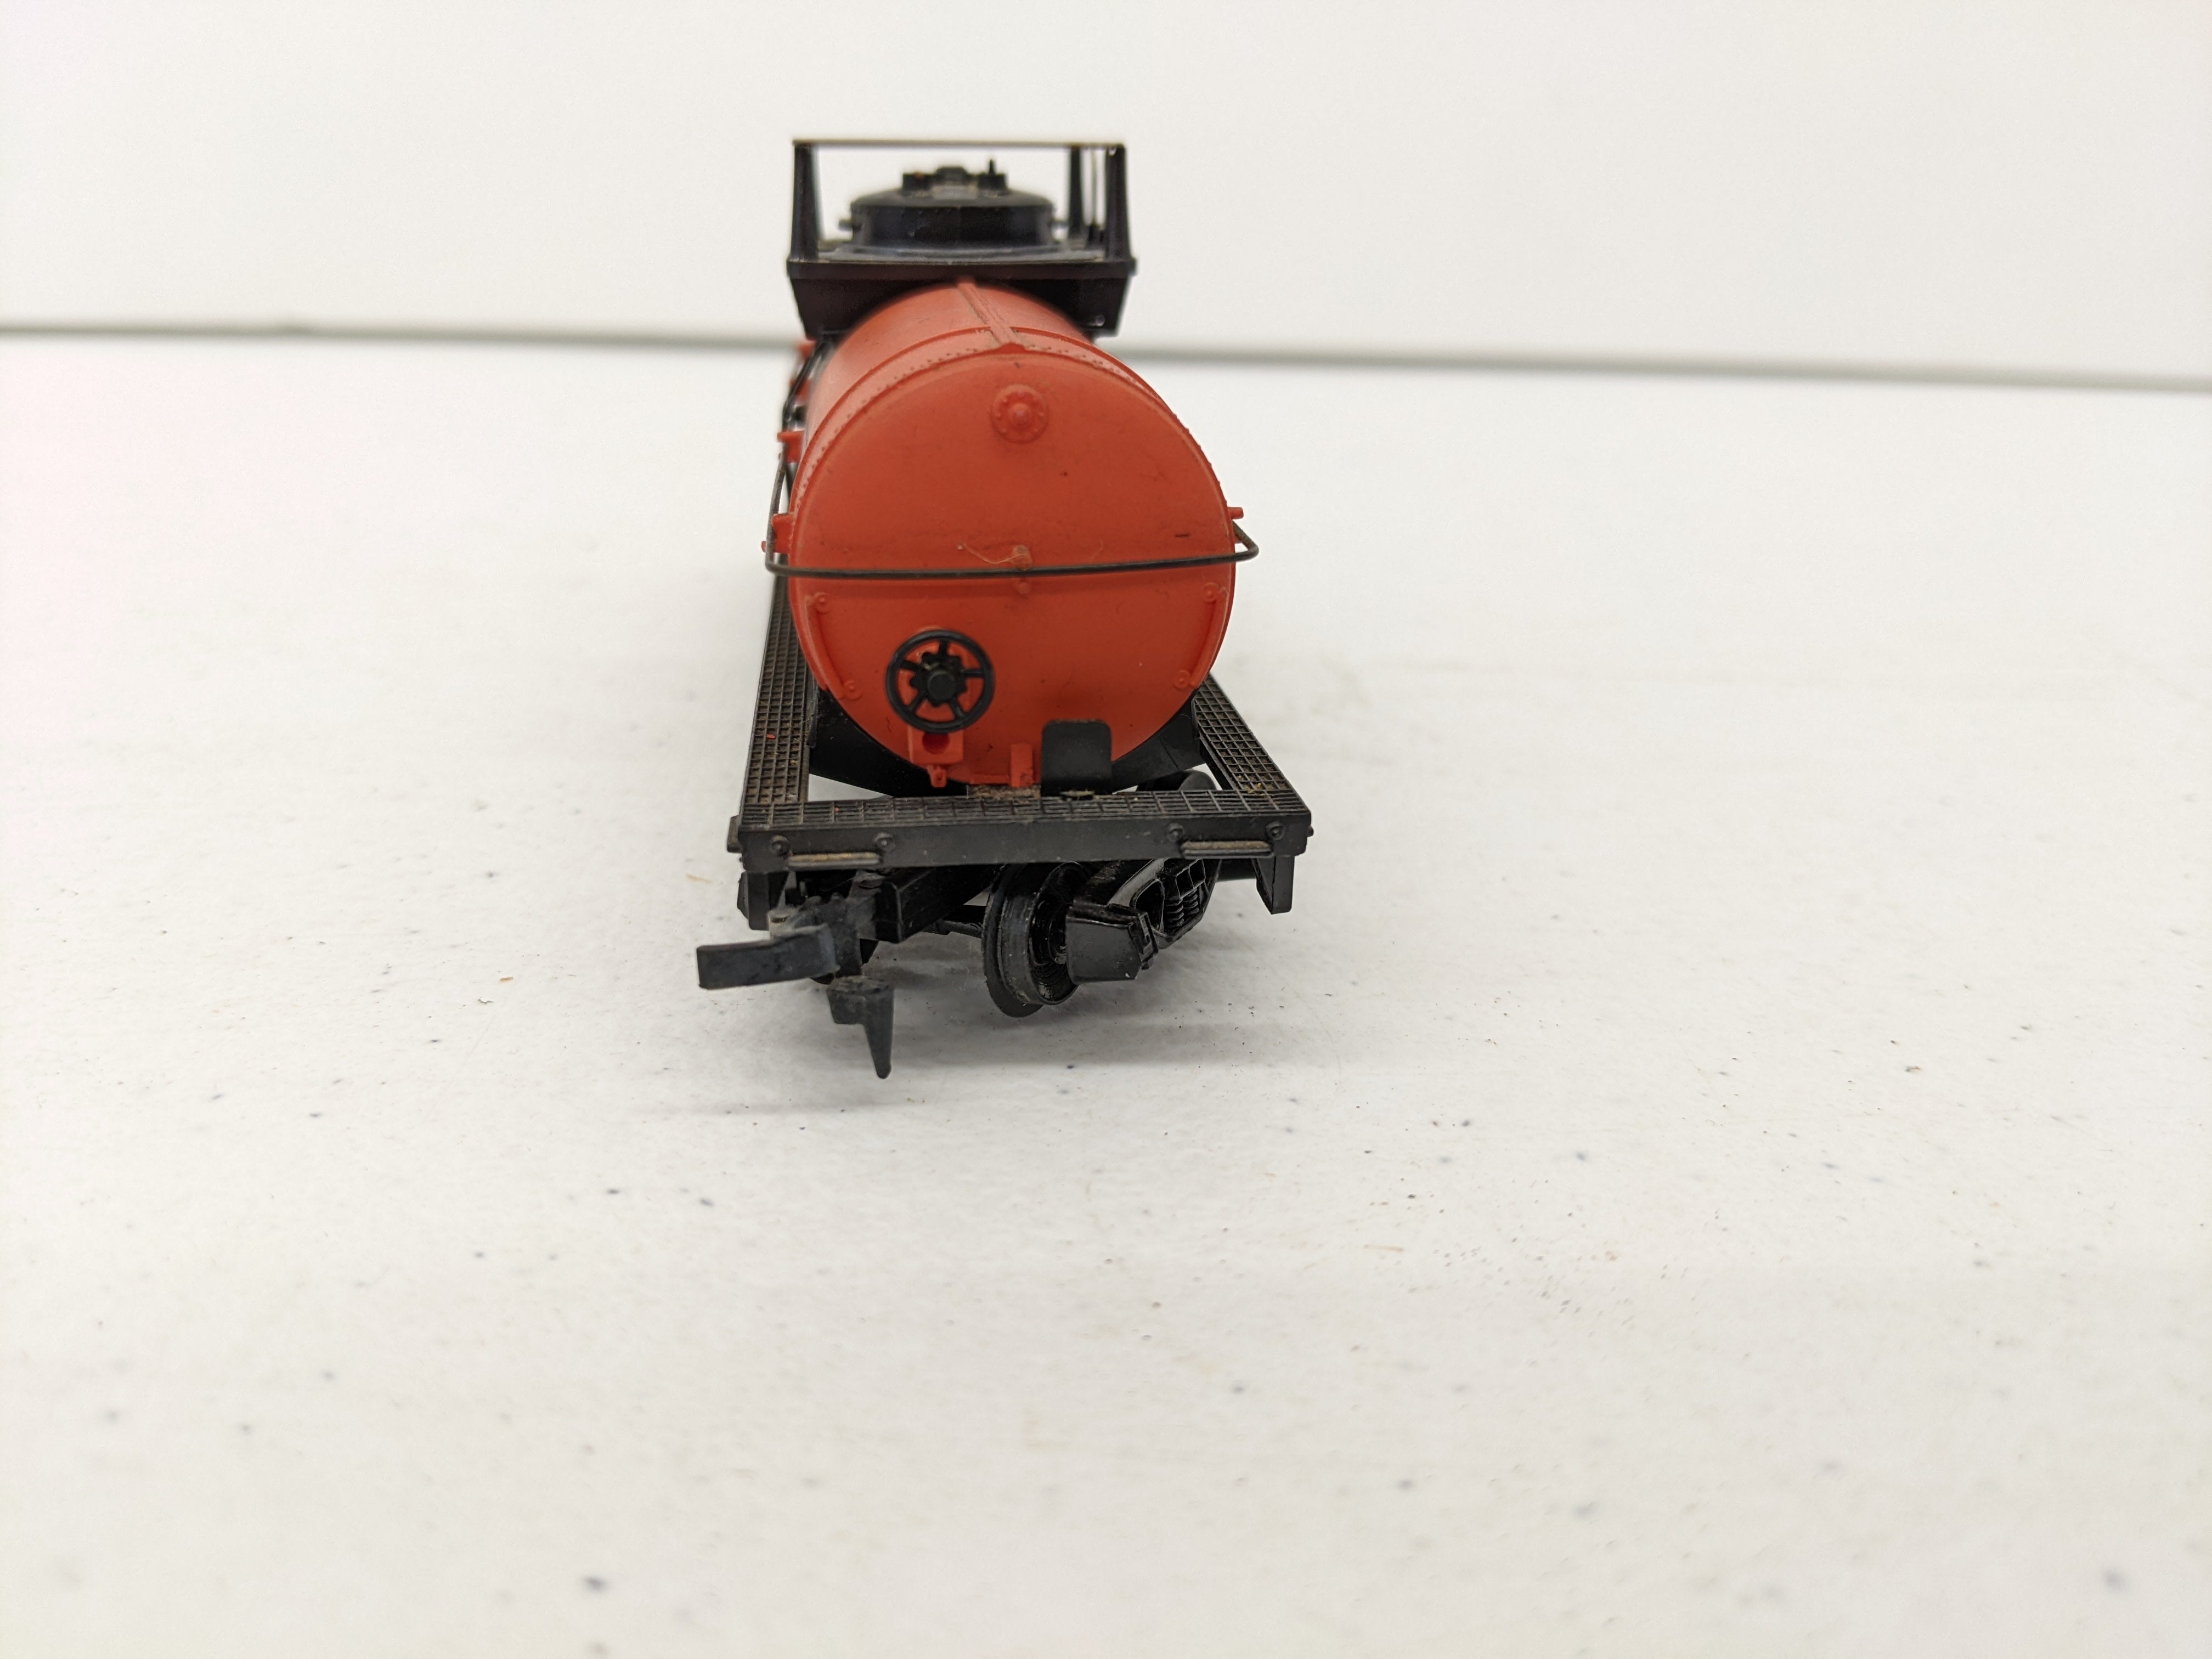 USED HO Scale, Single Dome Tank Car, Hooker Chemical